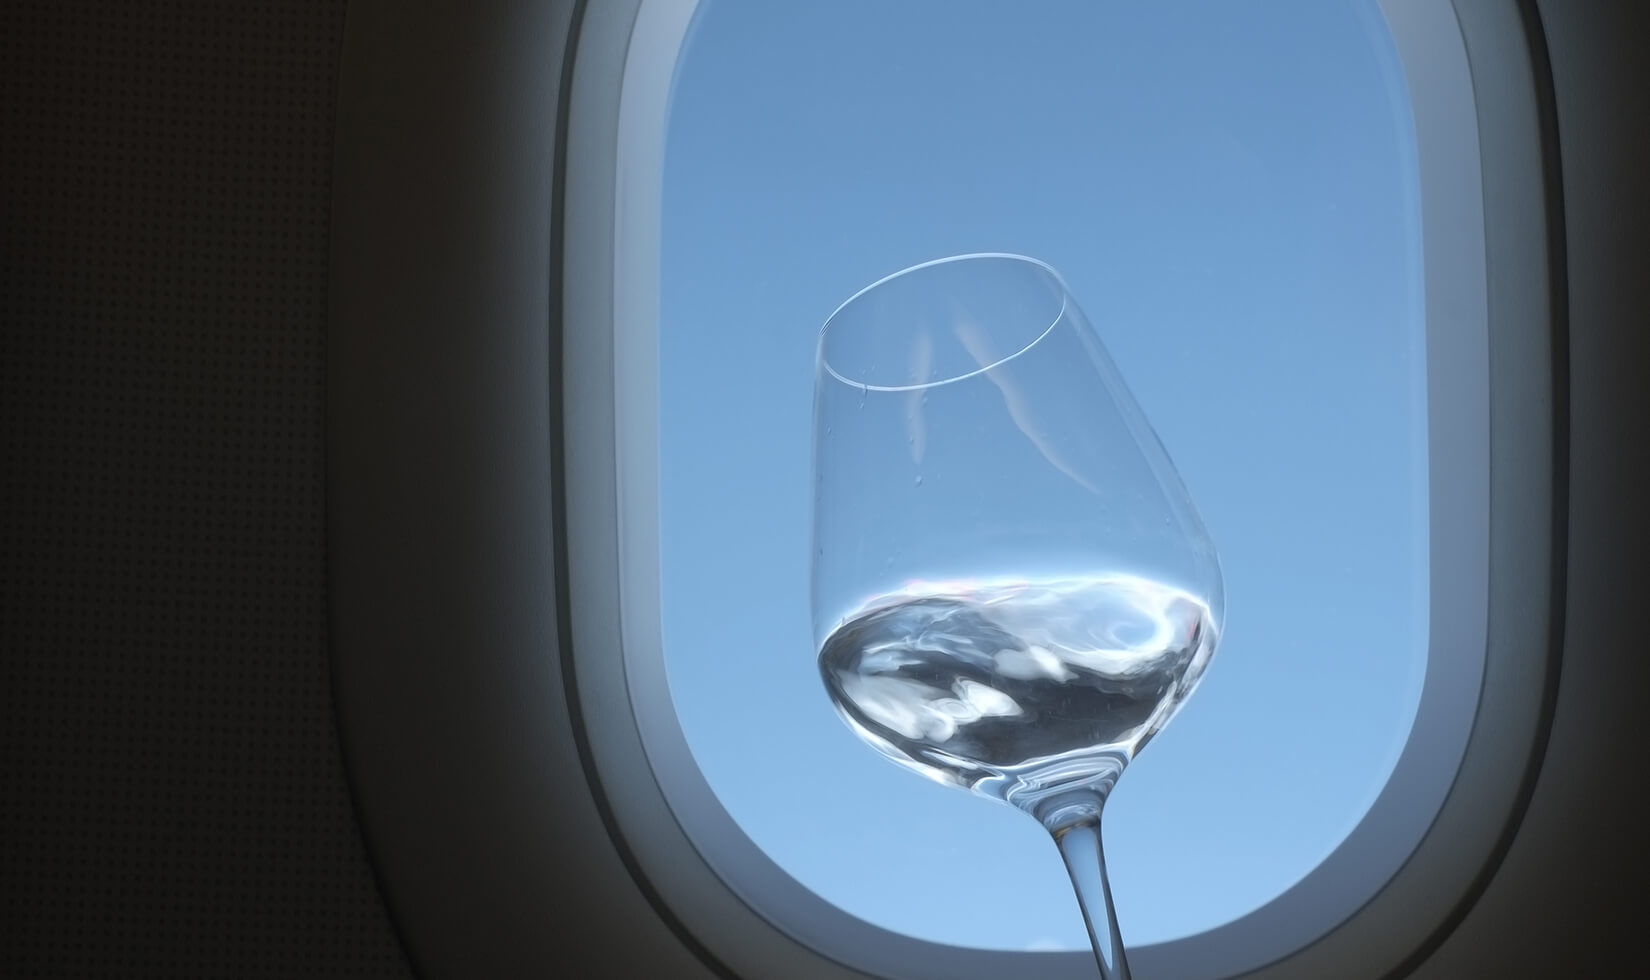 Wine Flight: Everything You Need To Know & Our 10 Best Flights!